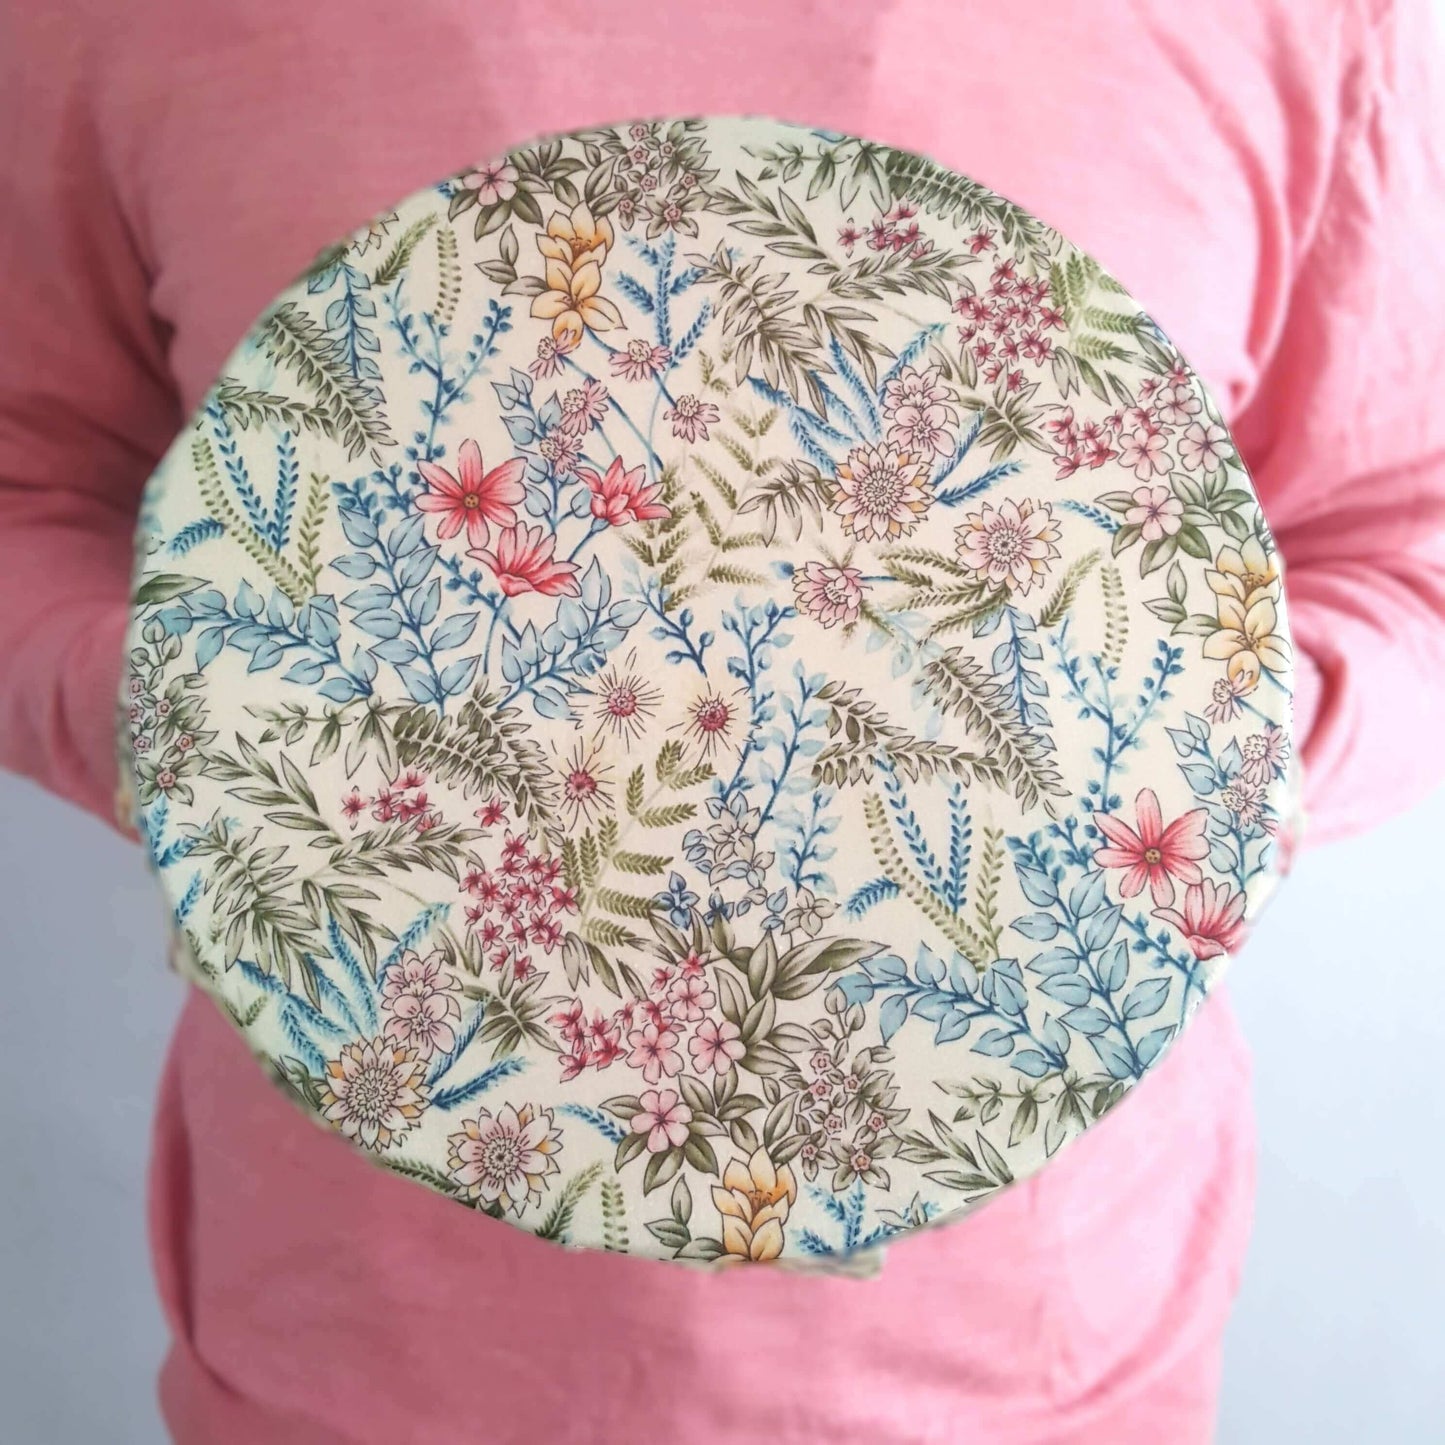 Reusable Beeswax Food Wraps 100% Hand Made in the UK by Honey Bee Good. Earth Kind Classic set of 3 in Botanical on bowl